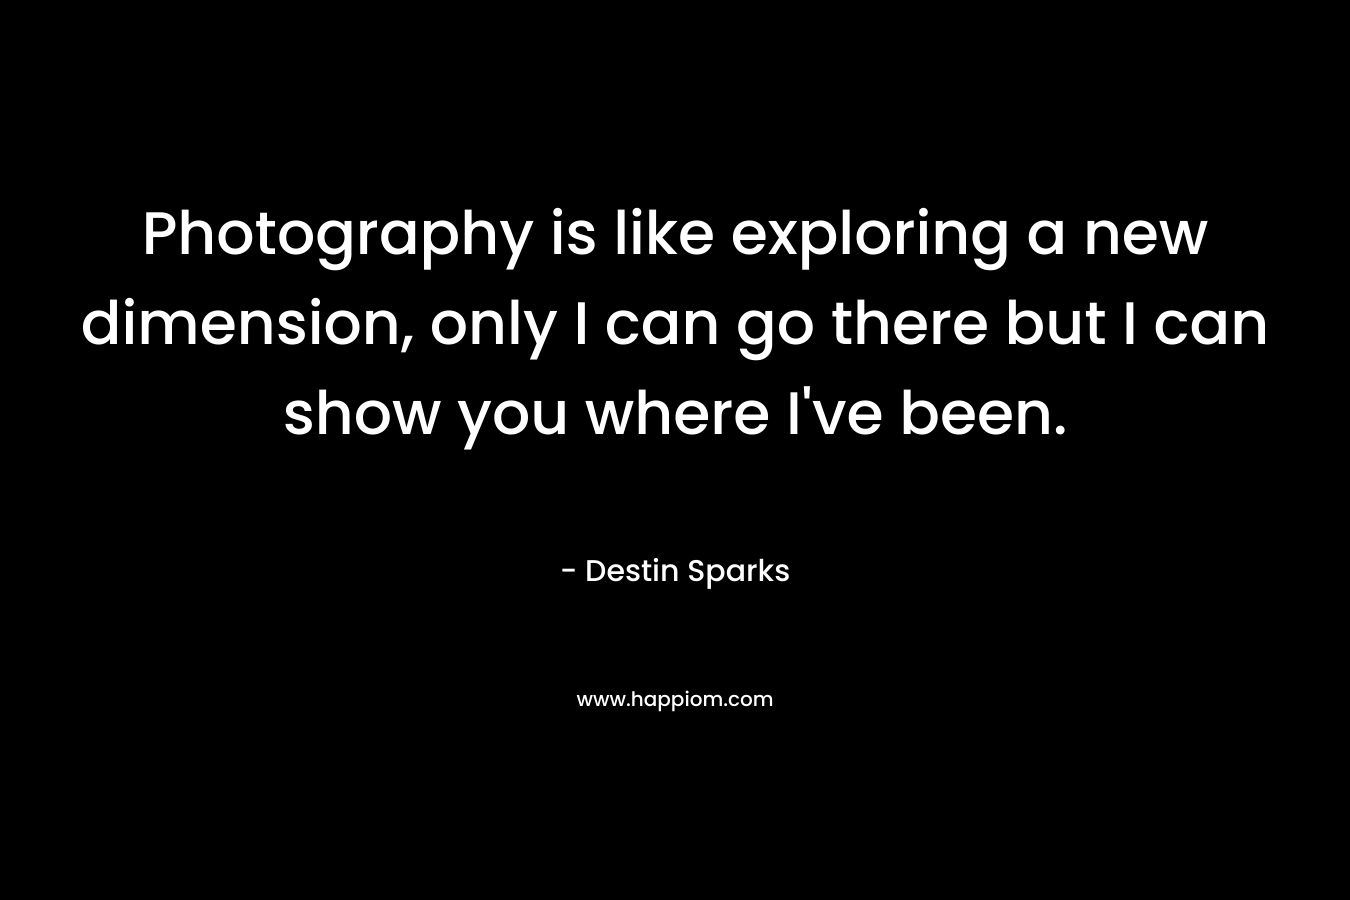 Photography is like exploring a new dimension, only I can go there but I can show you where I’ve been. – Destin Sparks